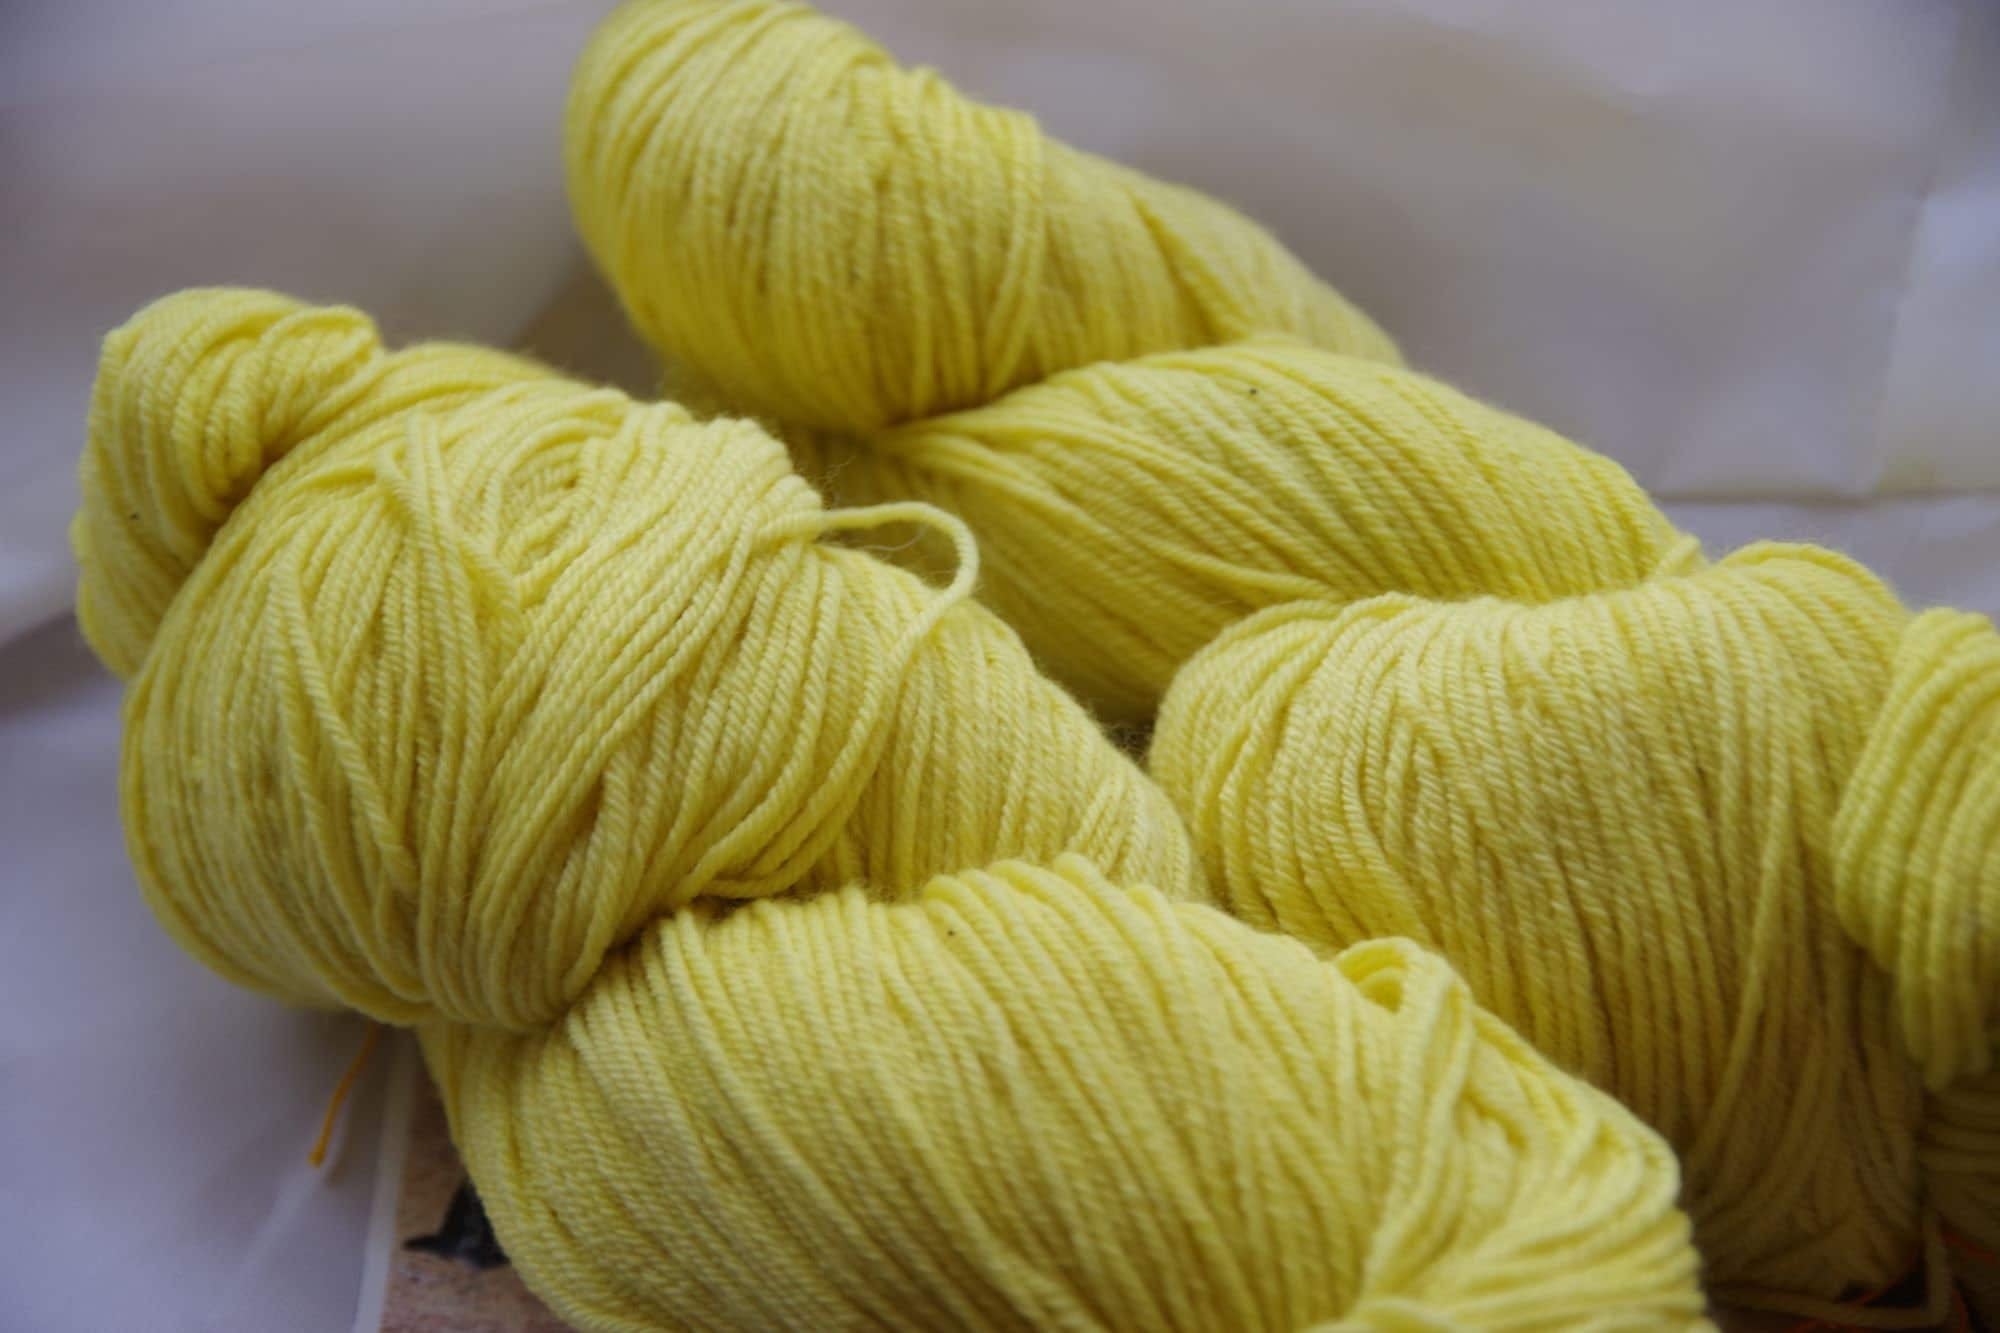 Canary BFL DK Weight Yarn, Hand dyed,Yellow Solid, Hand dyed Superwash BFL